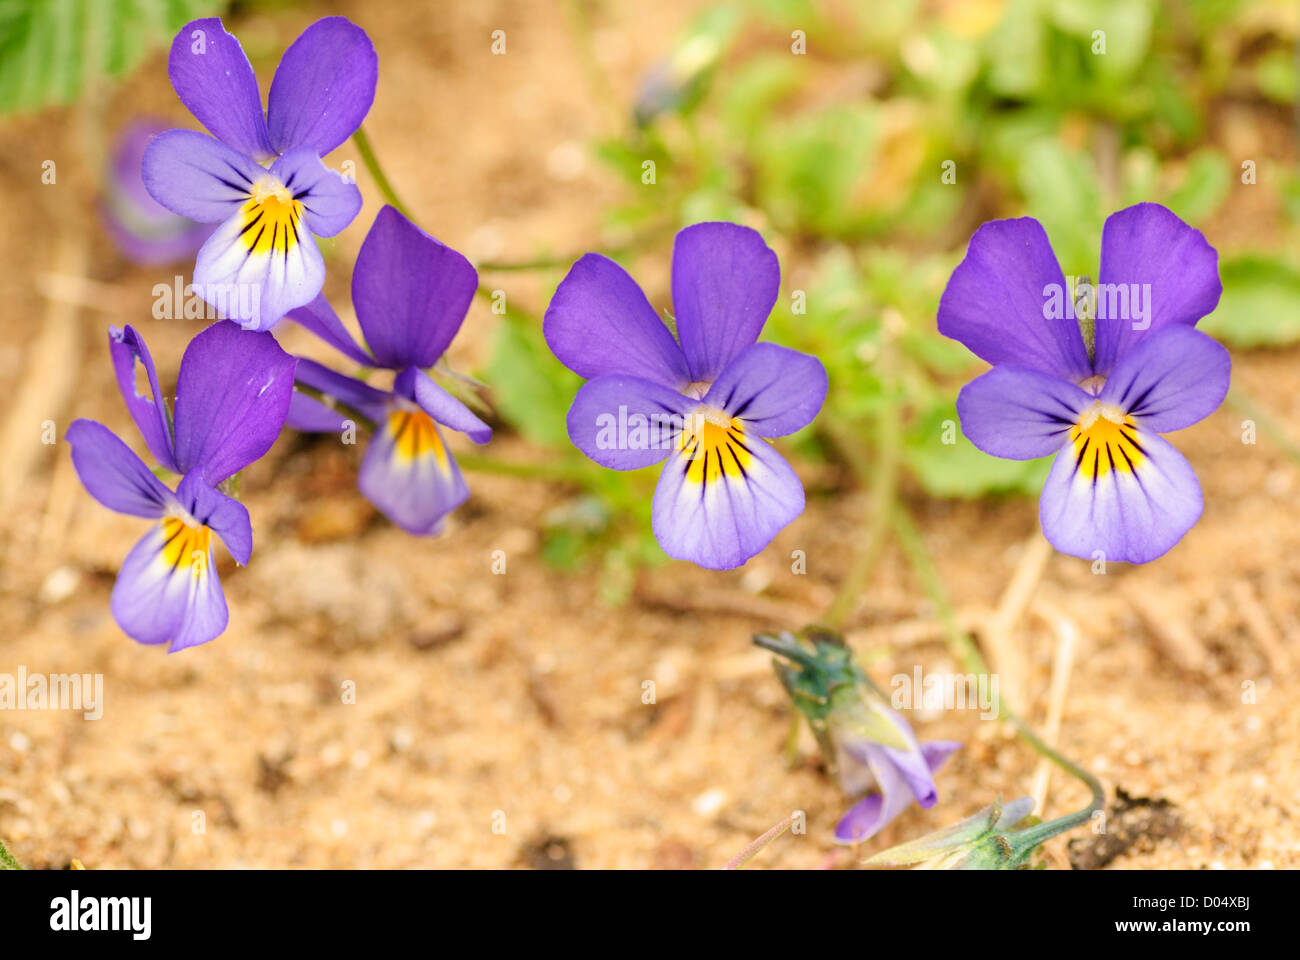 The purple form of the Wild Pansy, Viola tricolor ssp curtisii, growing on sand dunes at Kenfig Burrows in South Wales Stock Photo